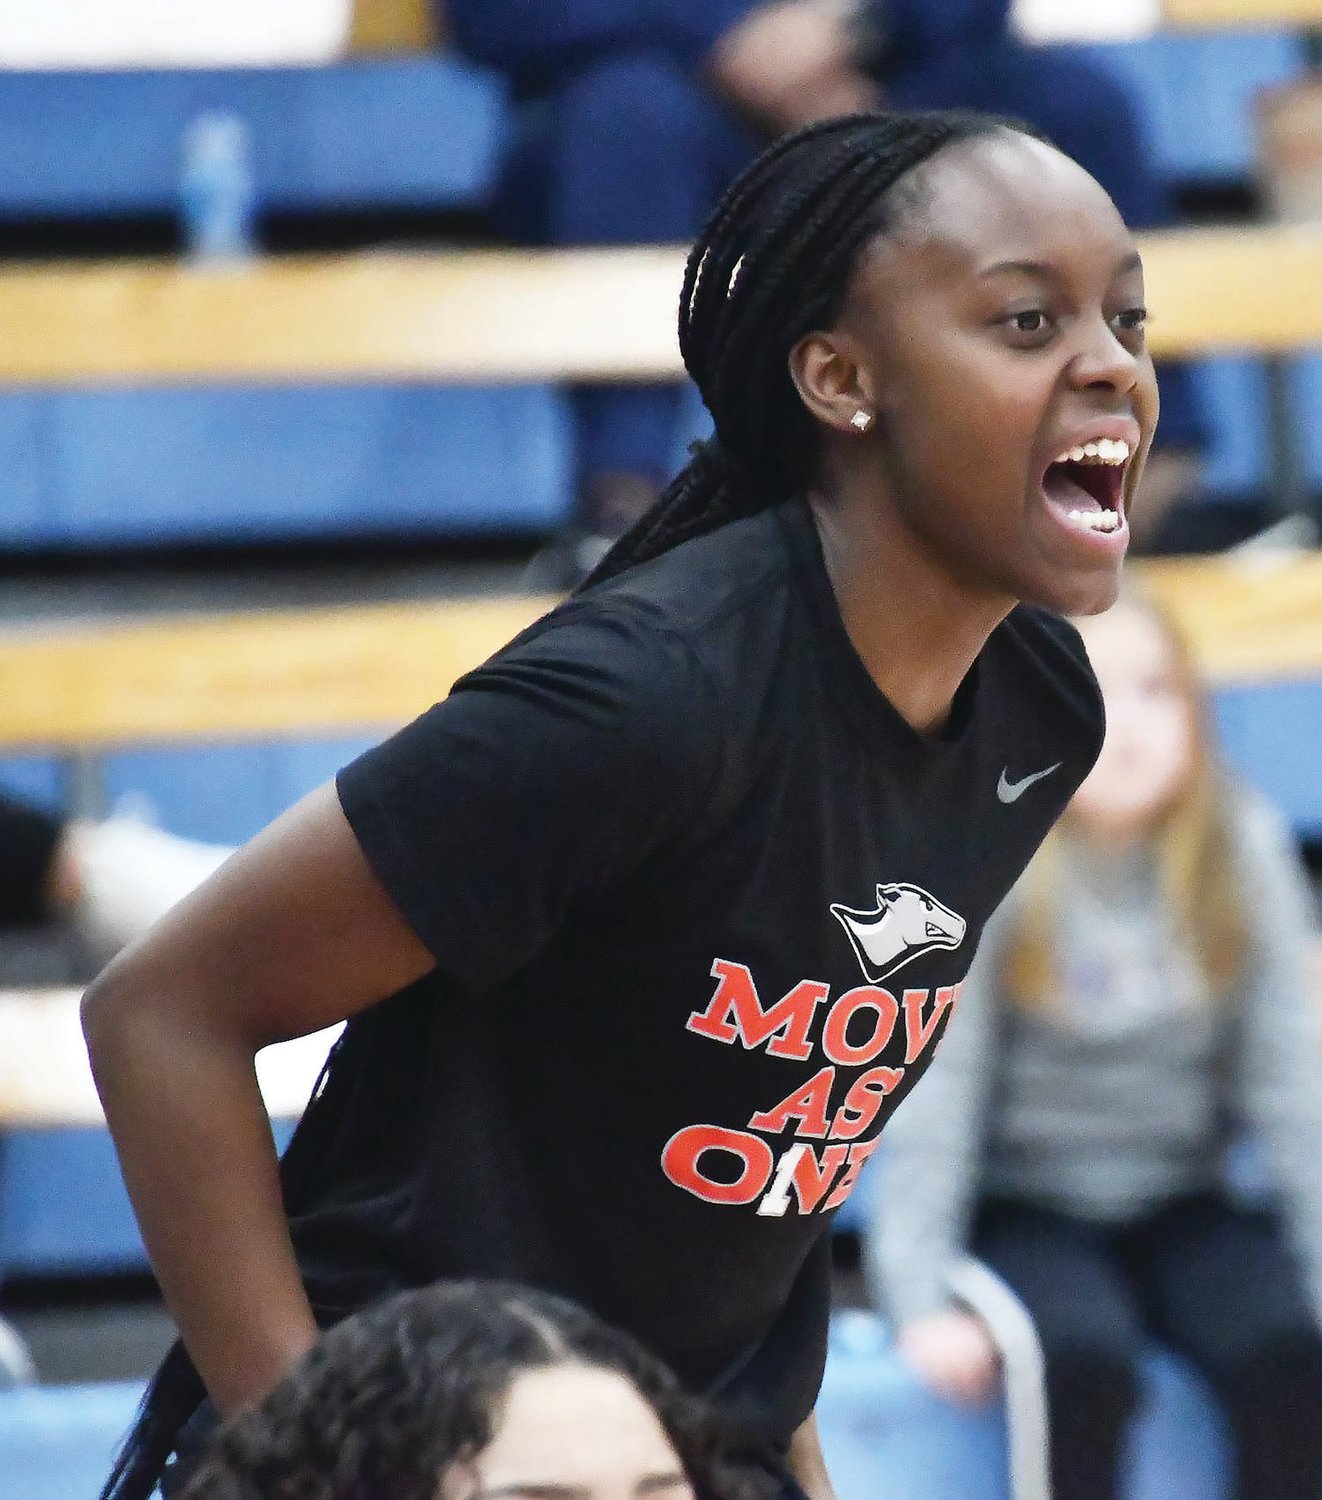 Kayhla Adams cheers on her teammates from the sideline during a Region XVI women's basketball championship game Friday, March 10.